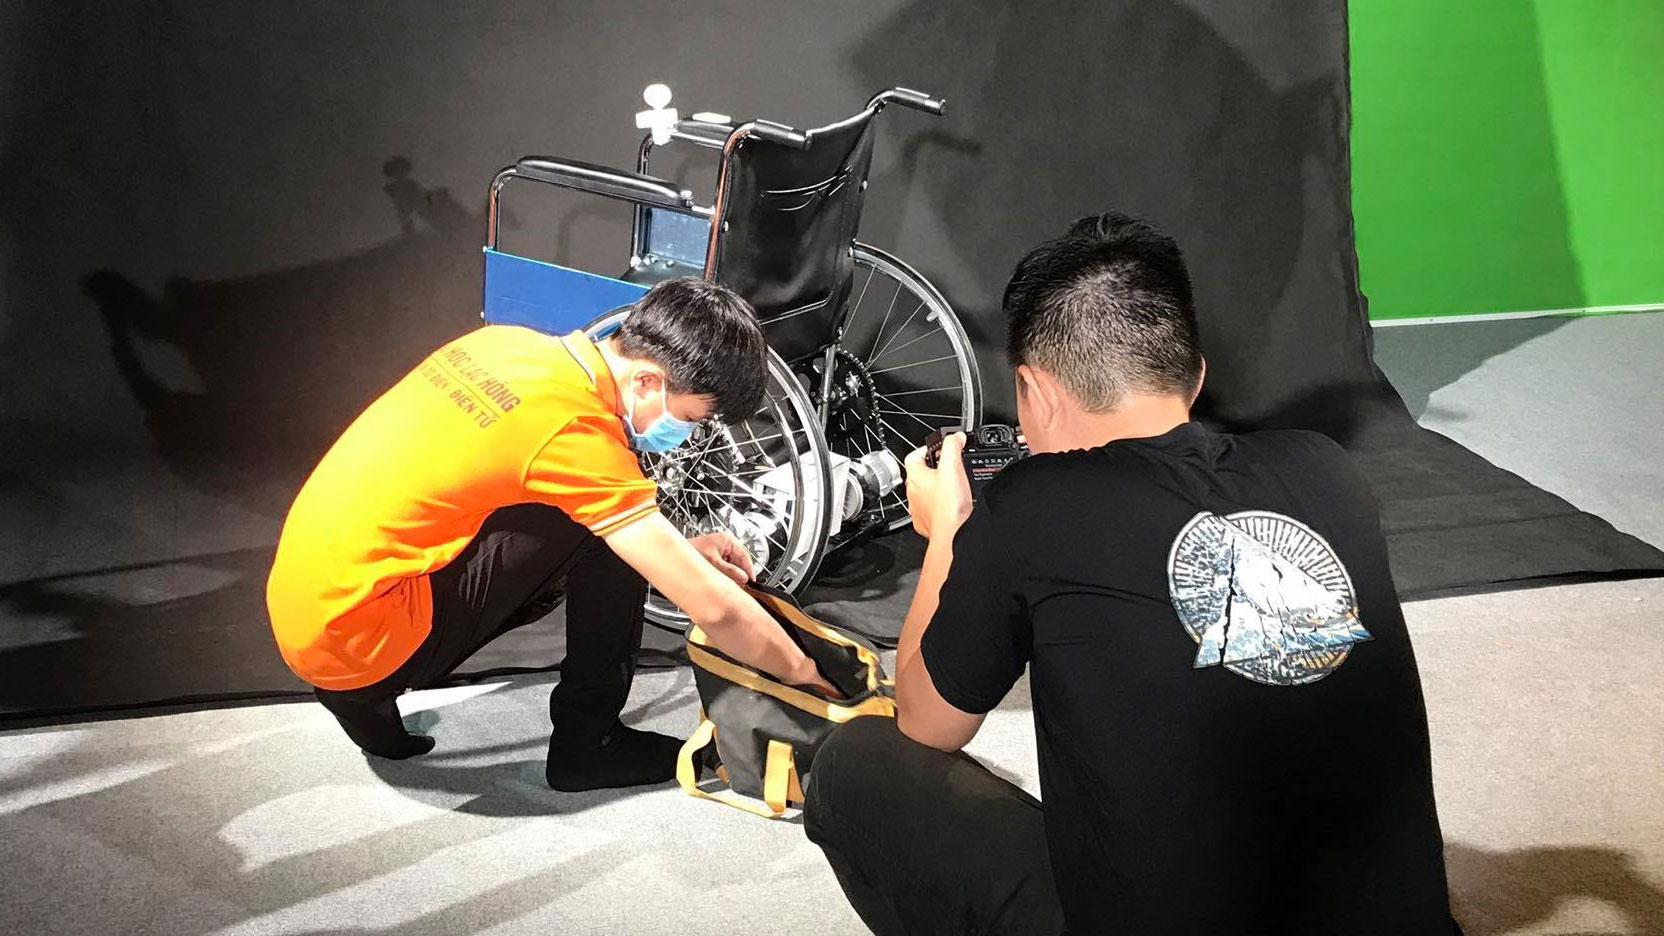 Two students from Lac Hong University in Vietnam work on a wheelchair device for Engineering Projects in Community Service.